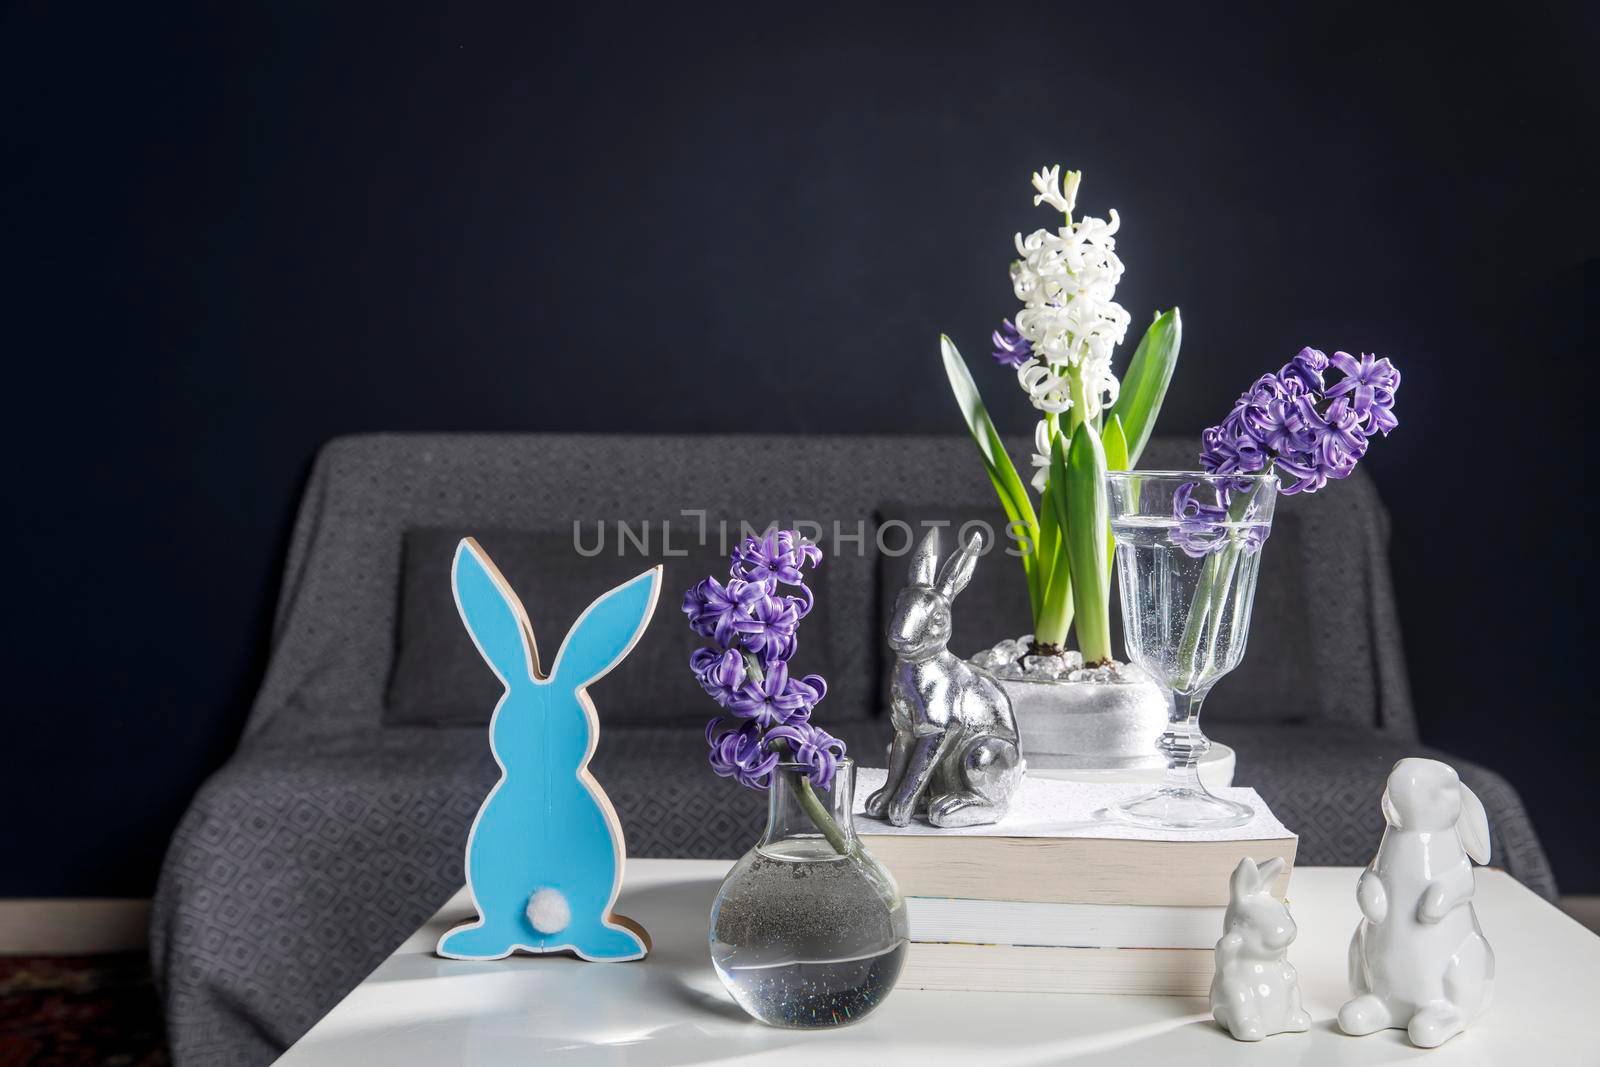 Ceramic figurines of Easter bunnies of different sizes on the table. Blue and white hyacinths in glass cups on a dark background. Easter design